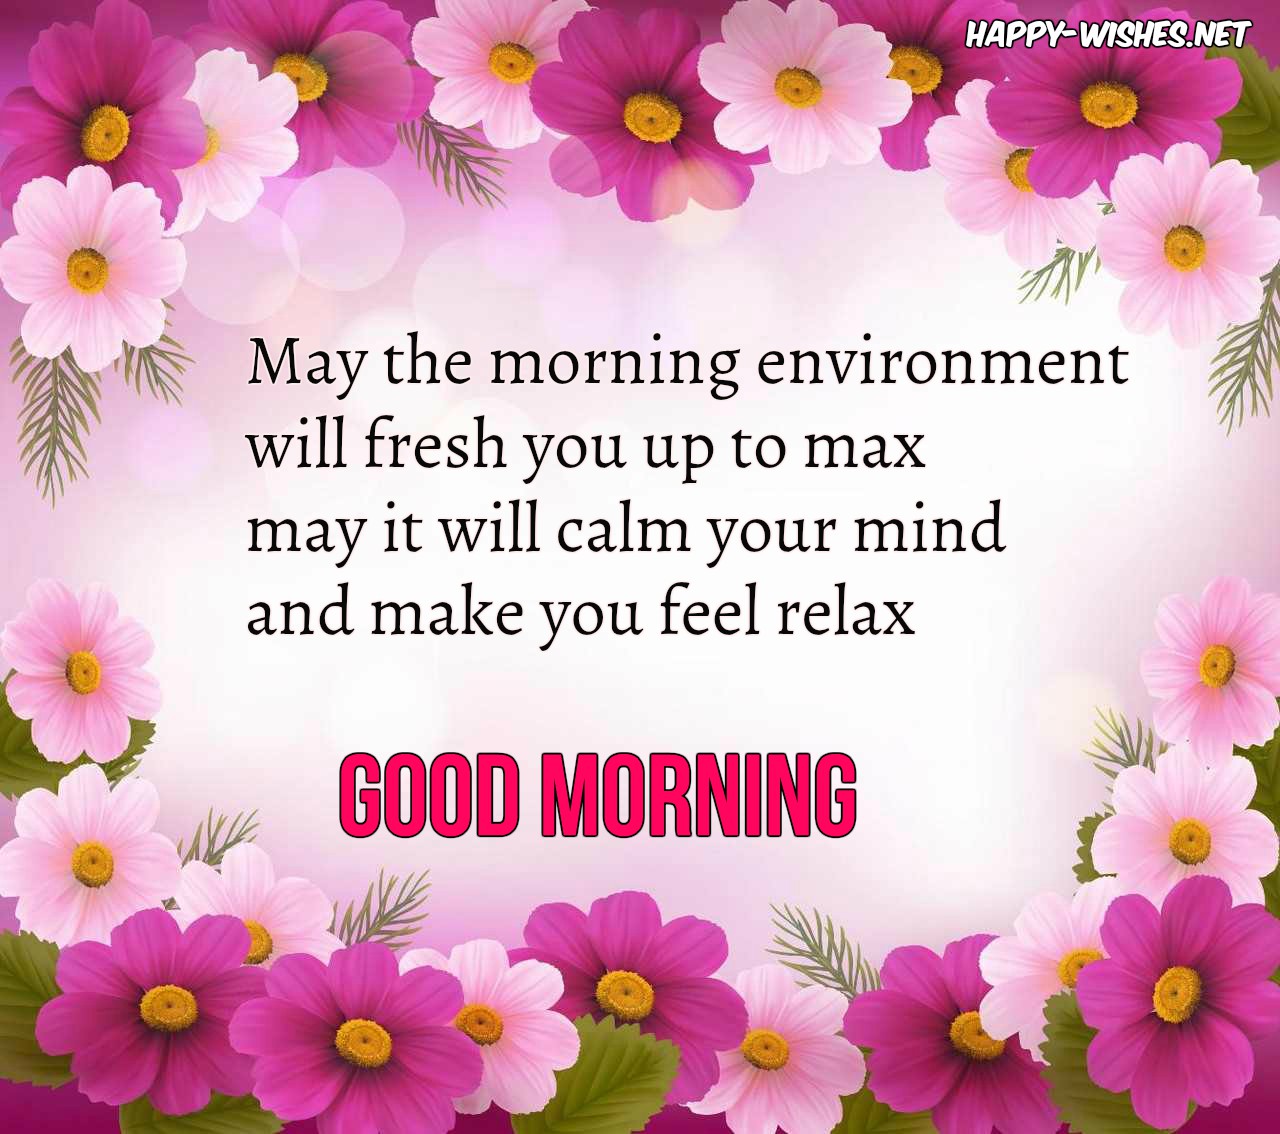 Good morning messages wishes